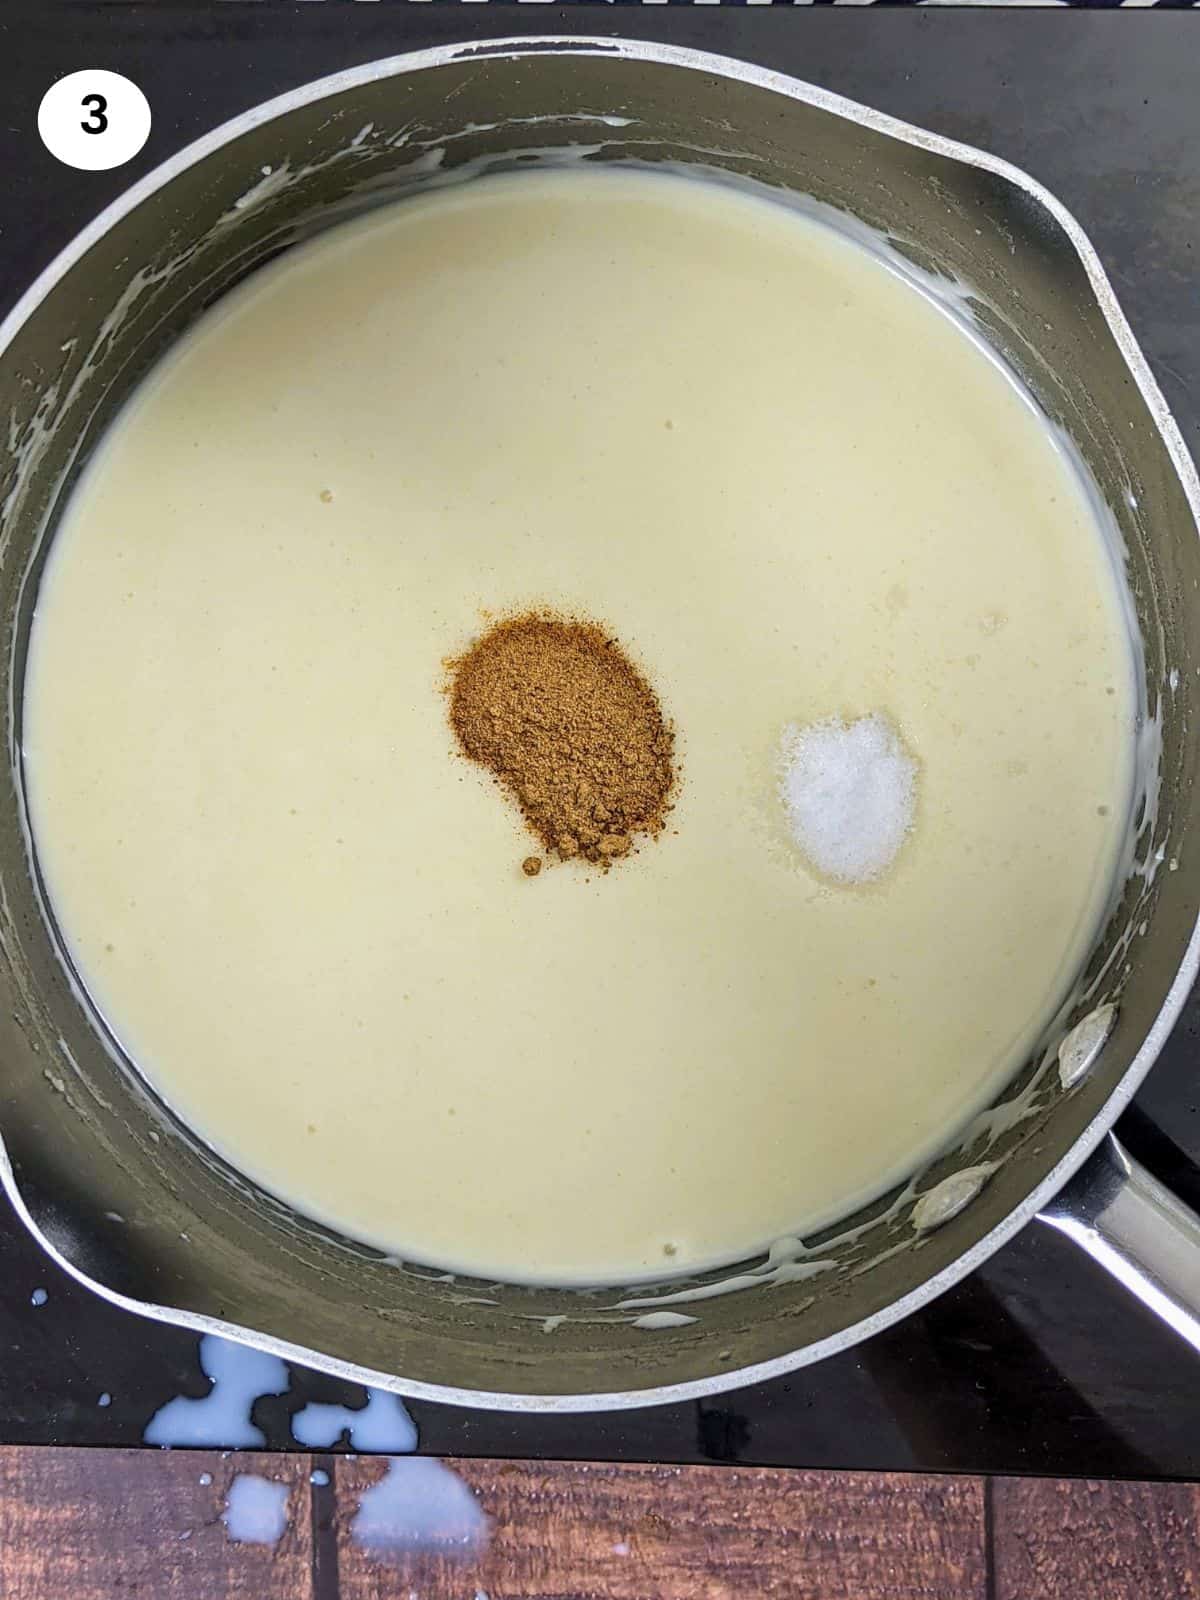 Adding the spices when the bechamel is ready